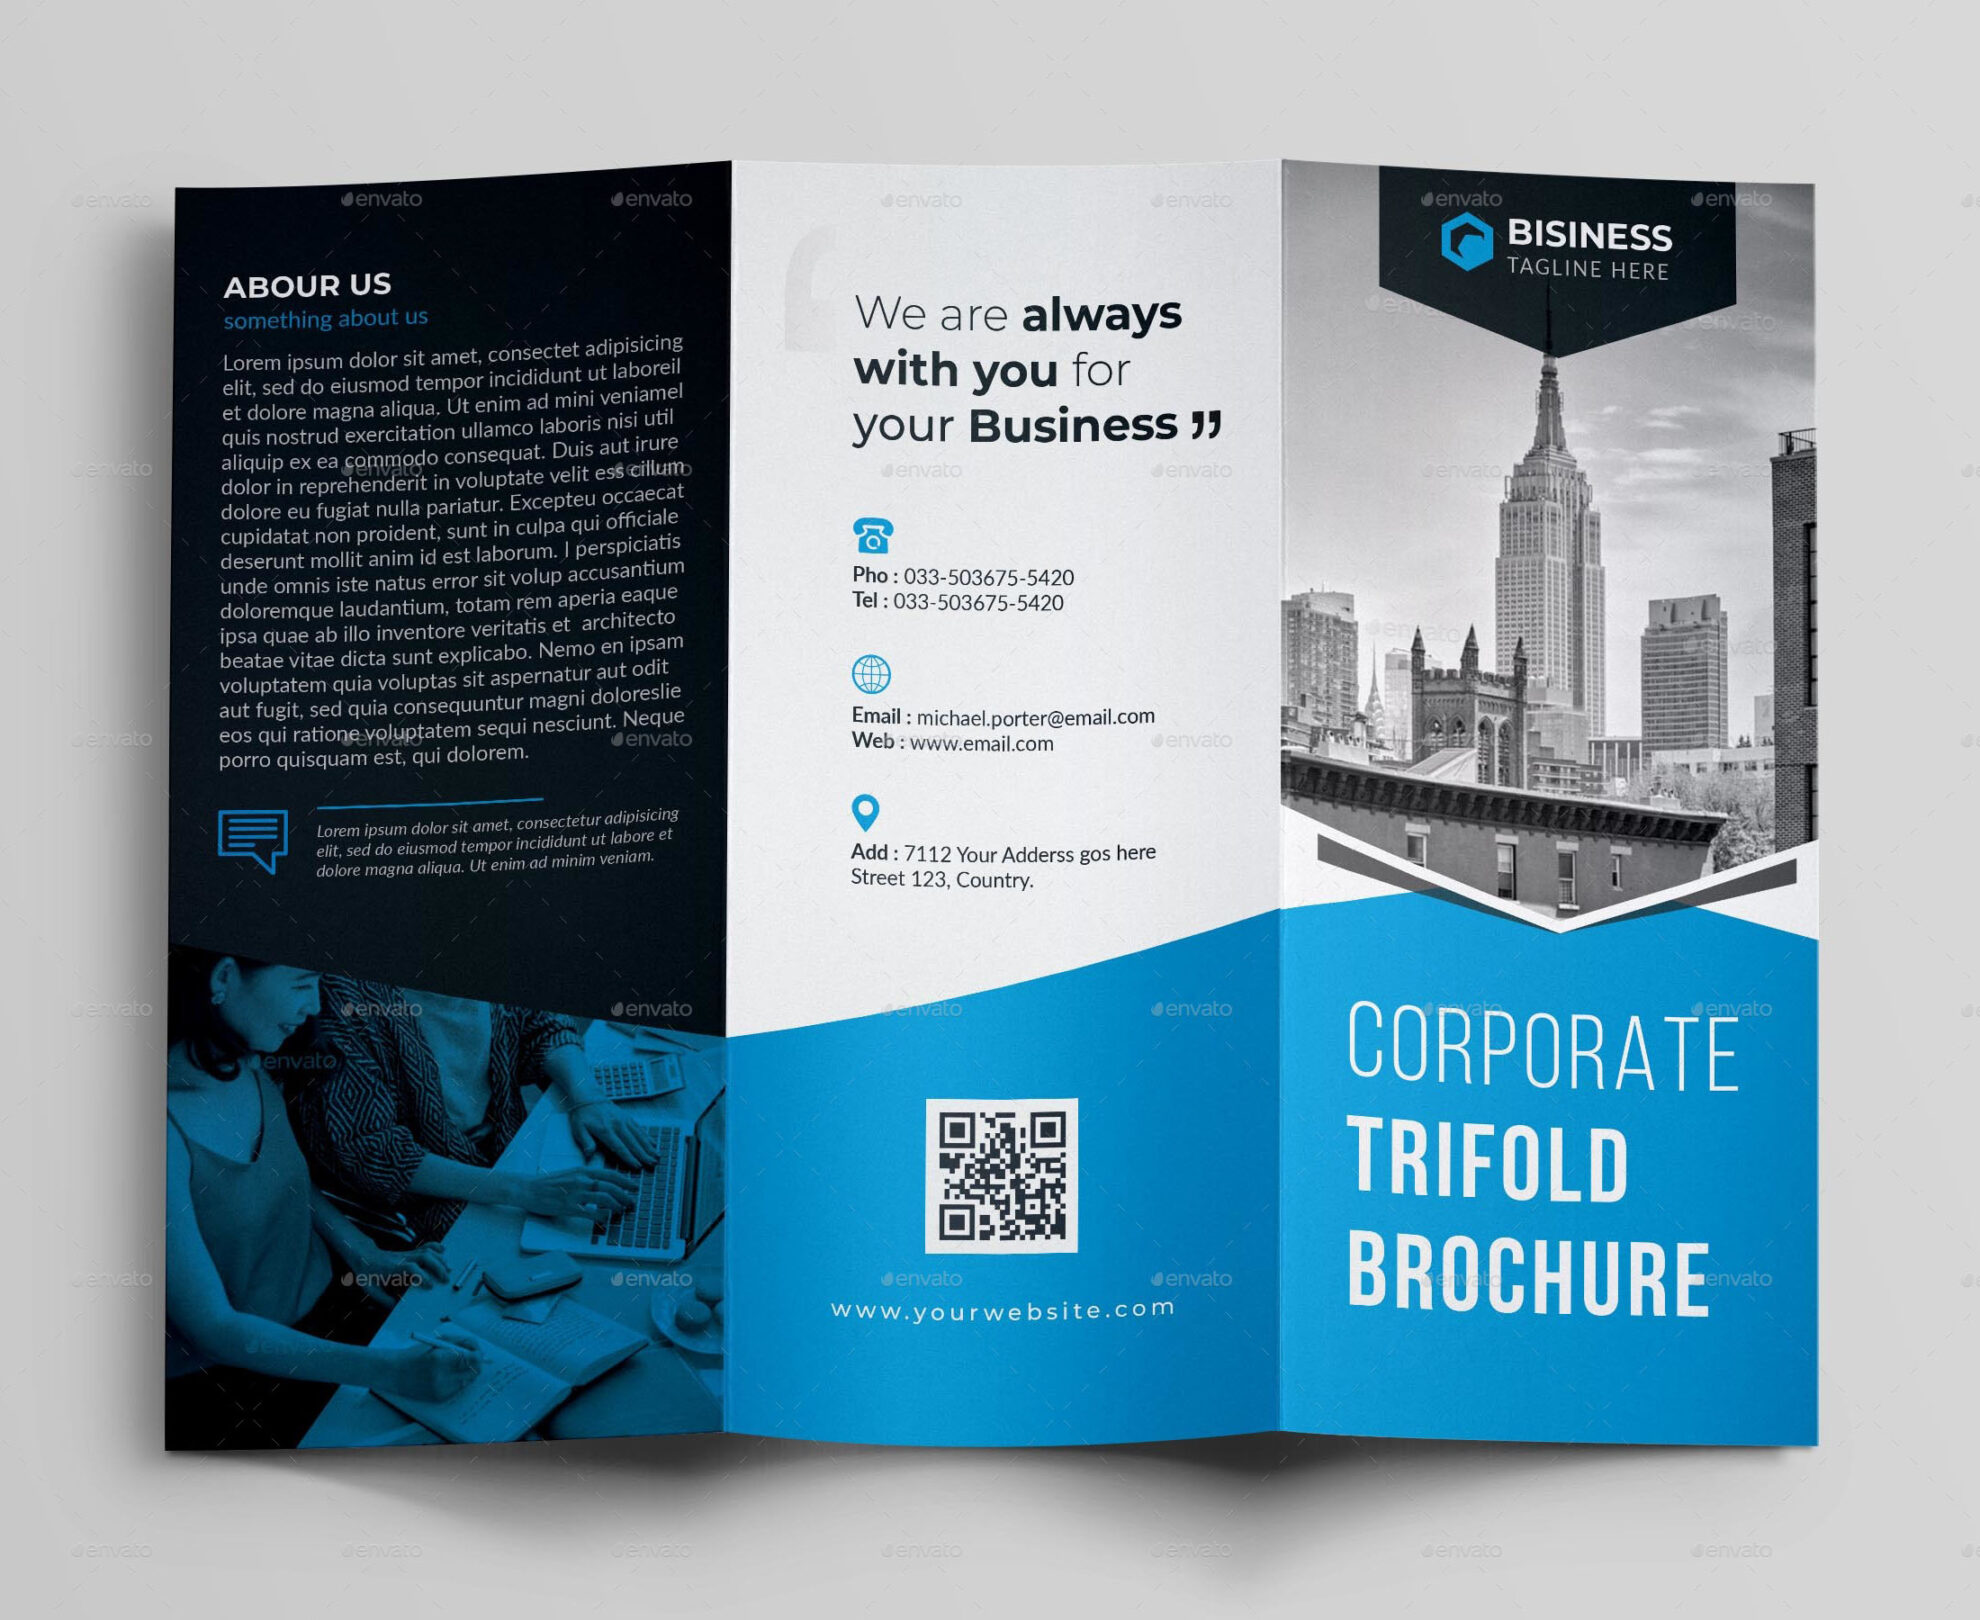 Architecture Brochure Templates Free Download